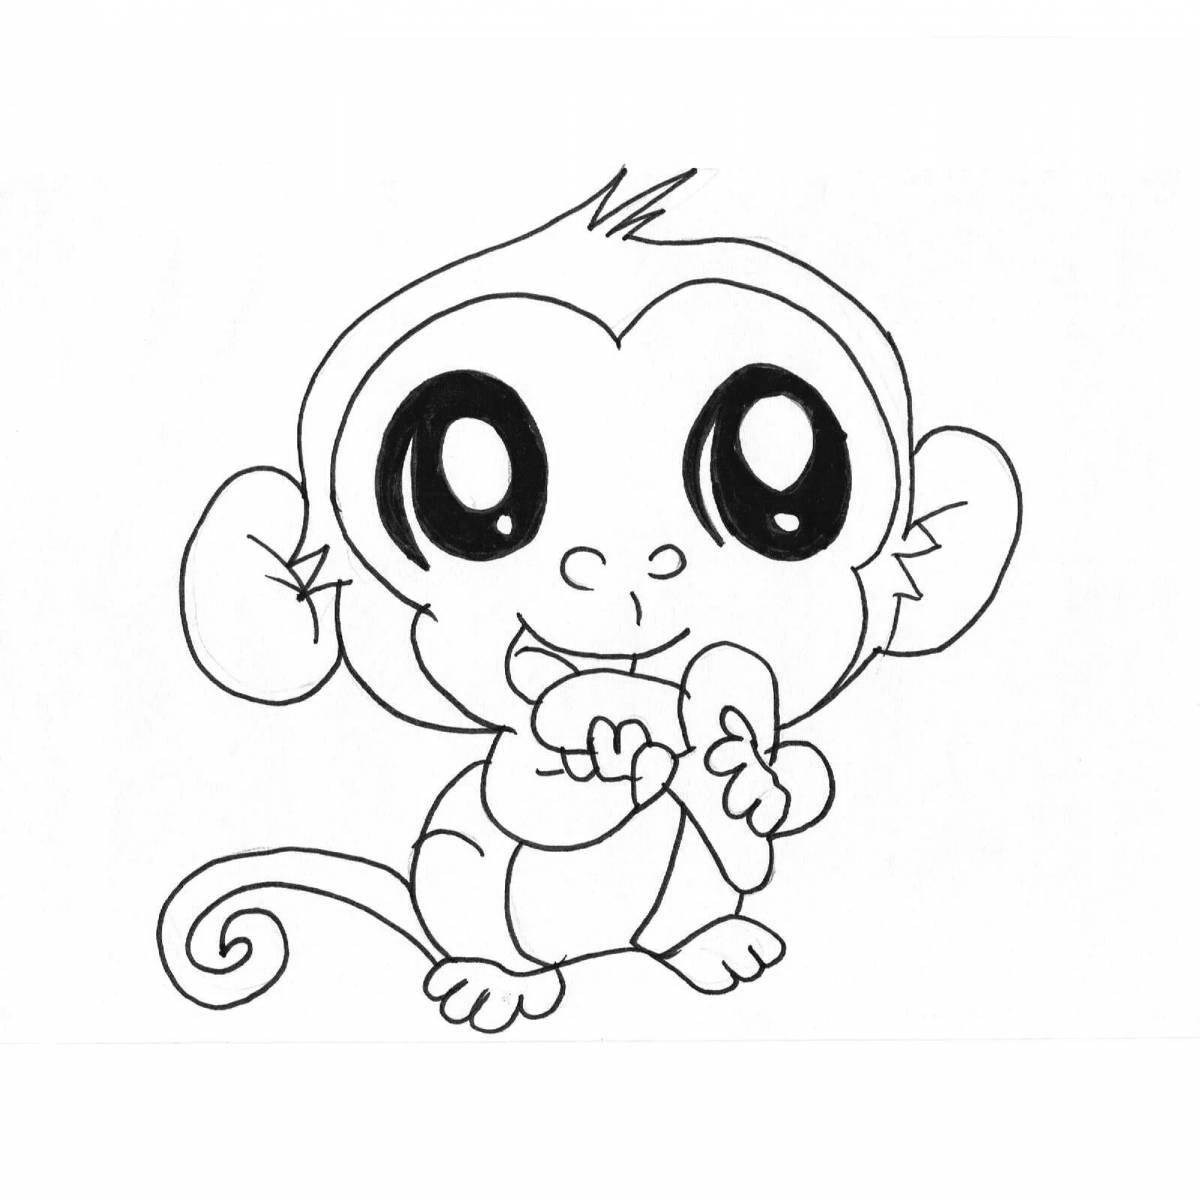 Amazing coloring pages cute animals